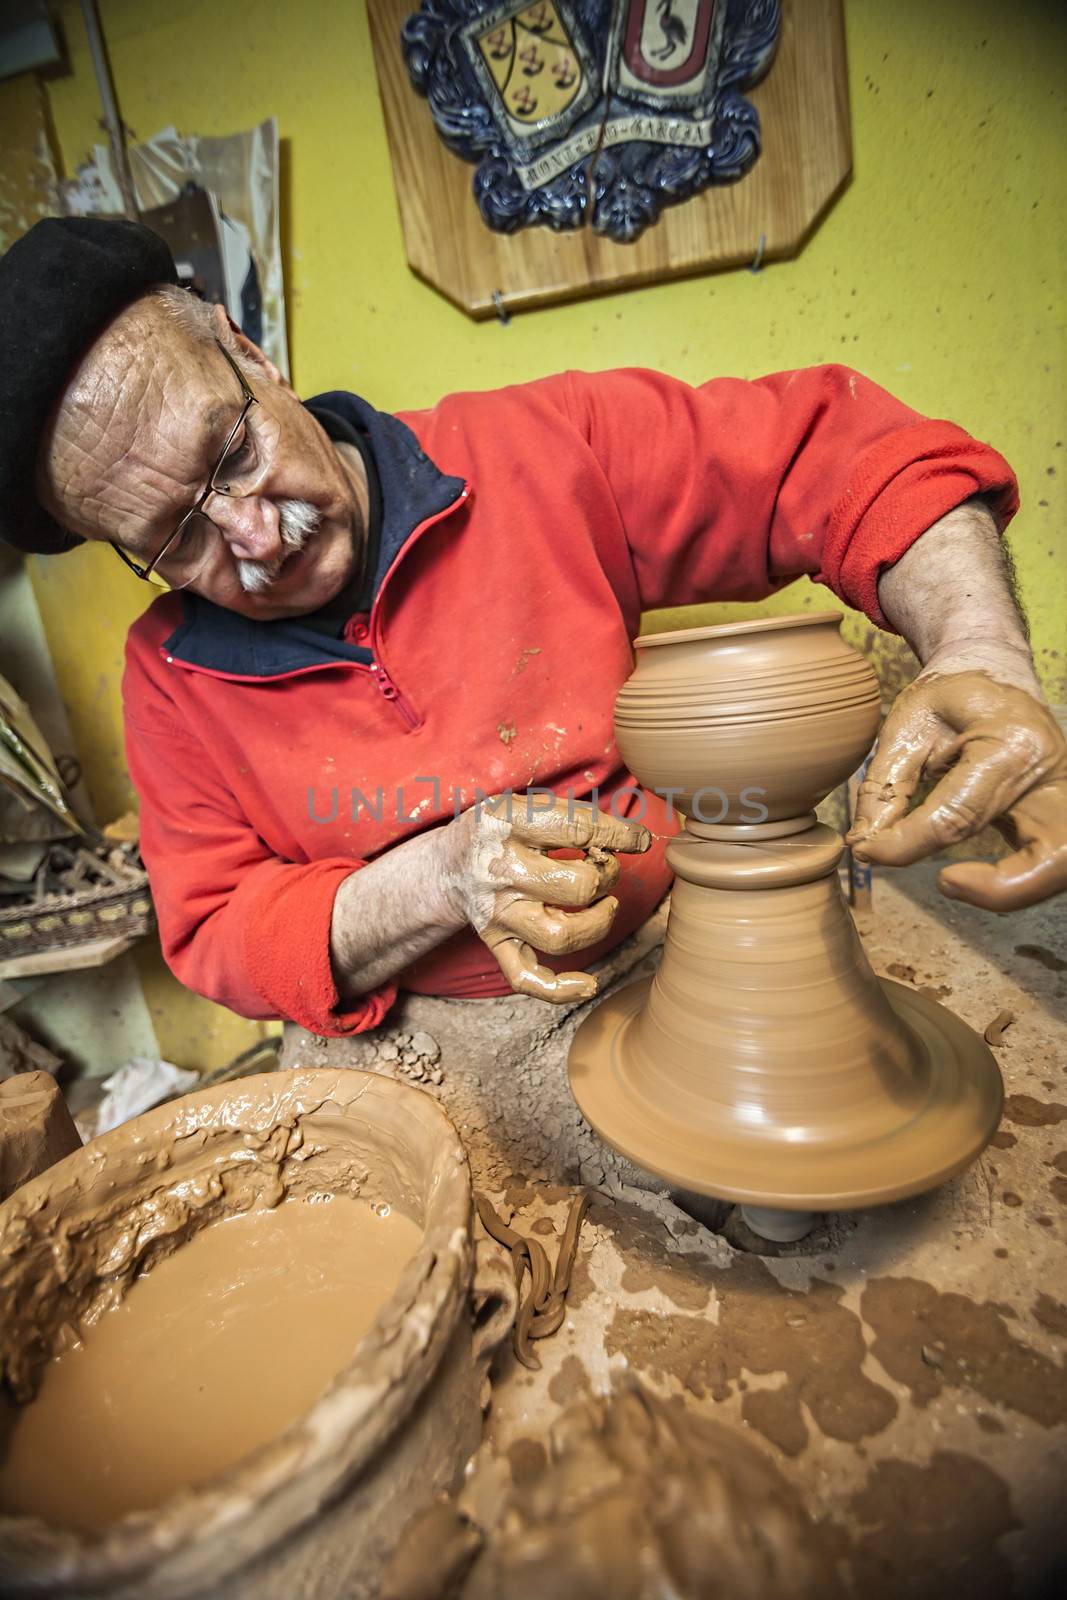 Potter's lathe by removing a piece of mud with a thin rope, clay pottery ceramics typical of Bailen, Jaen province, Andalucia, Spain